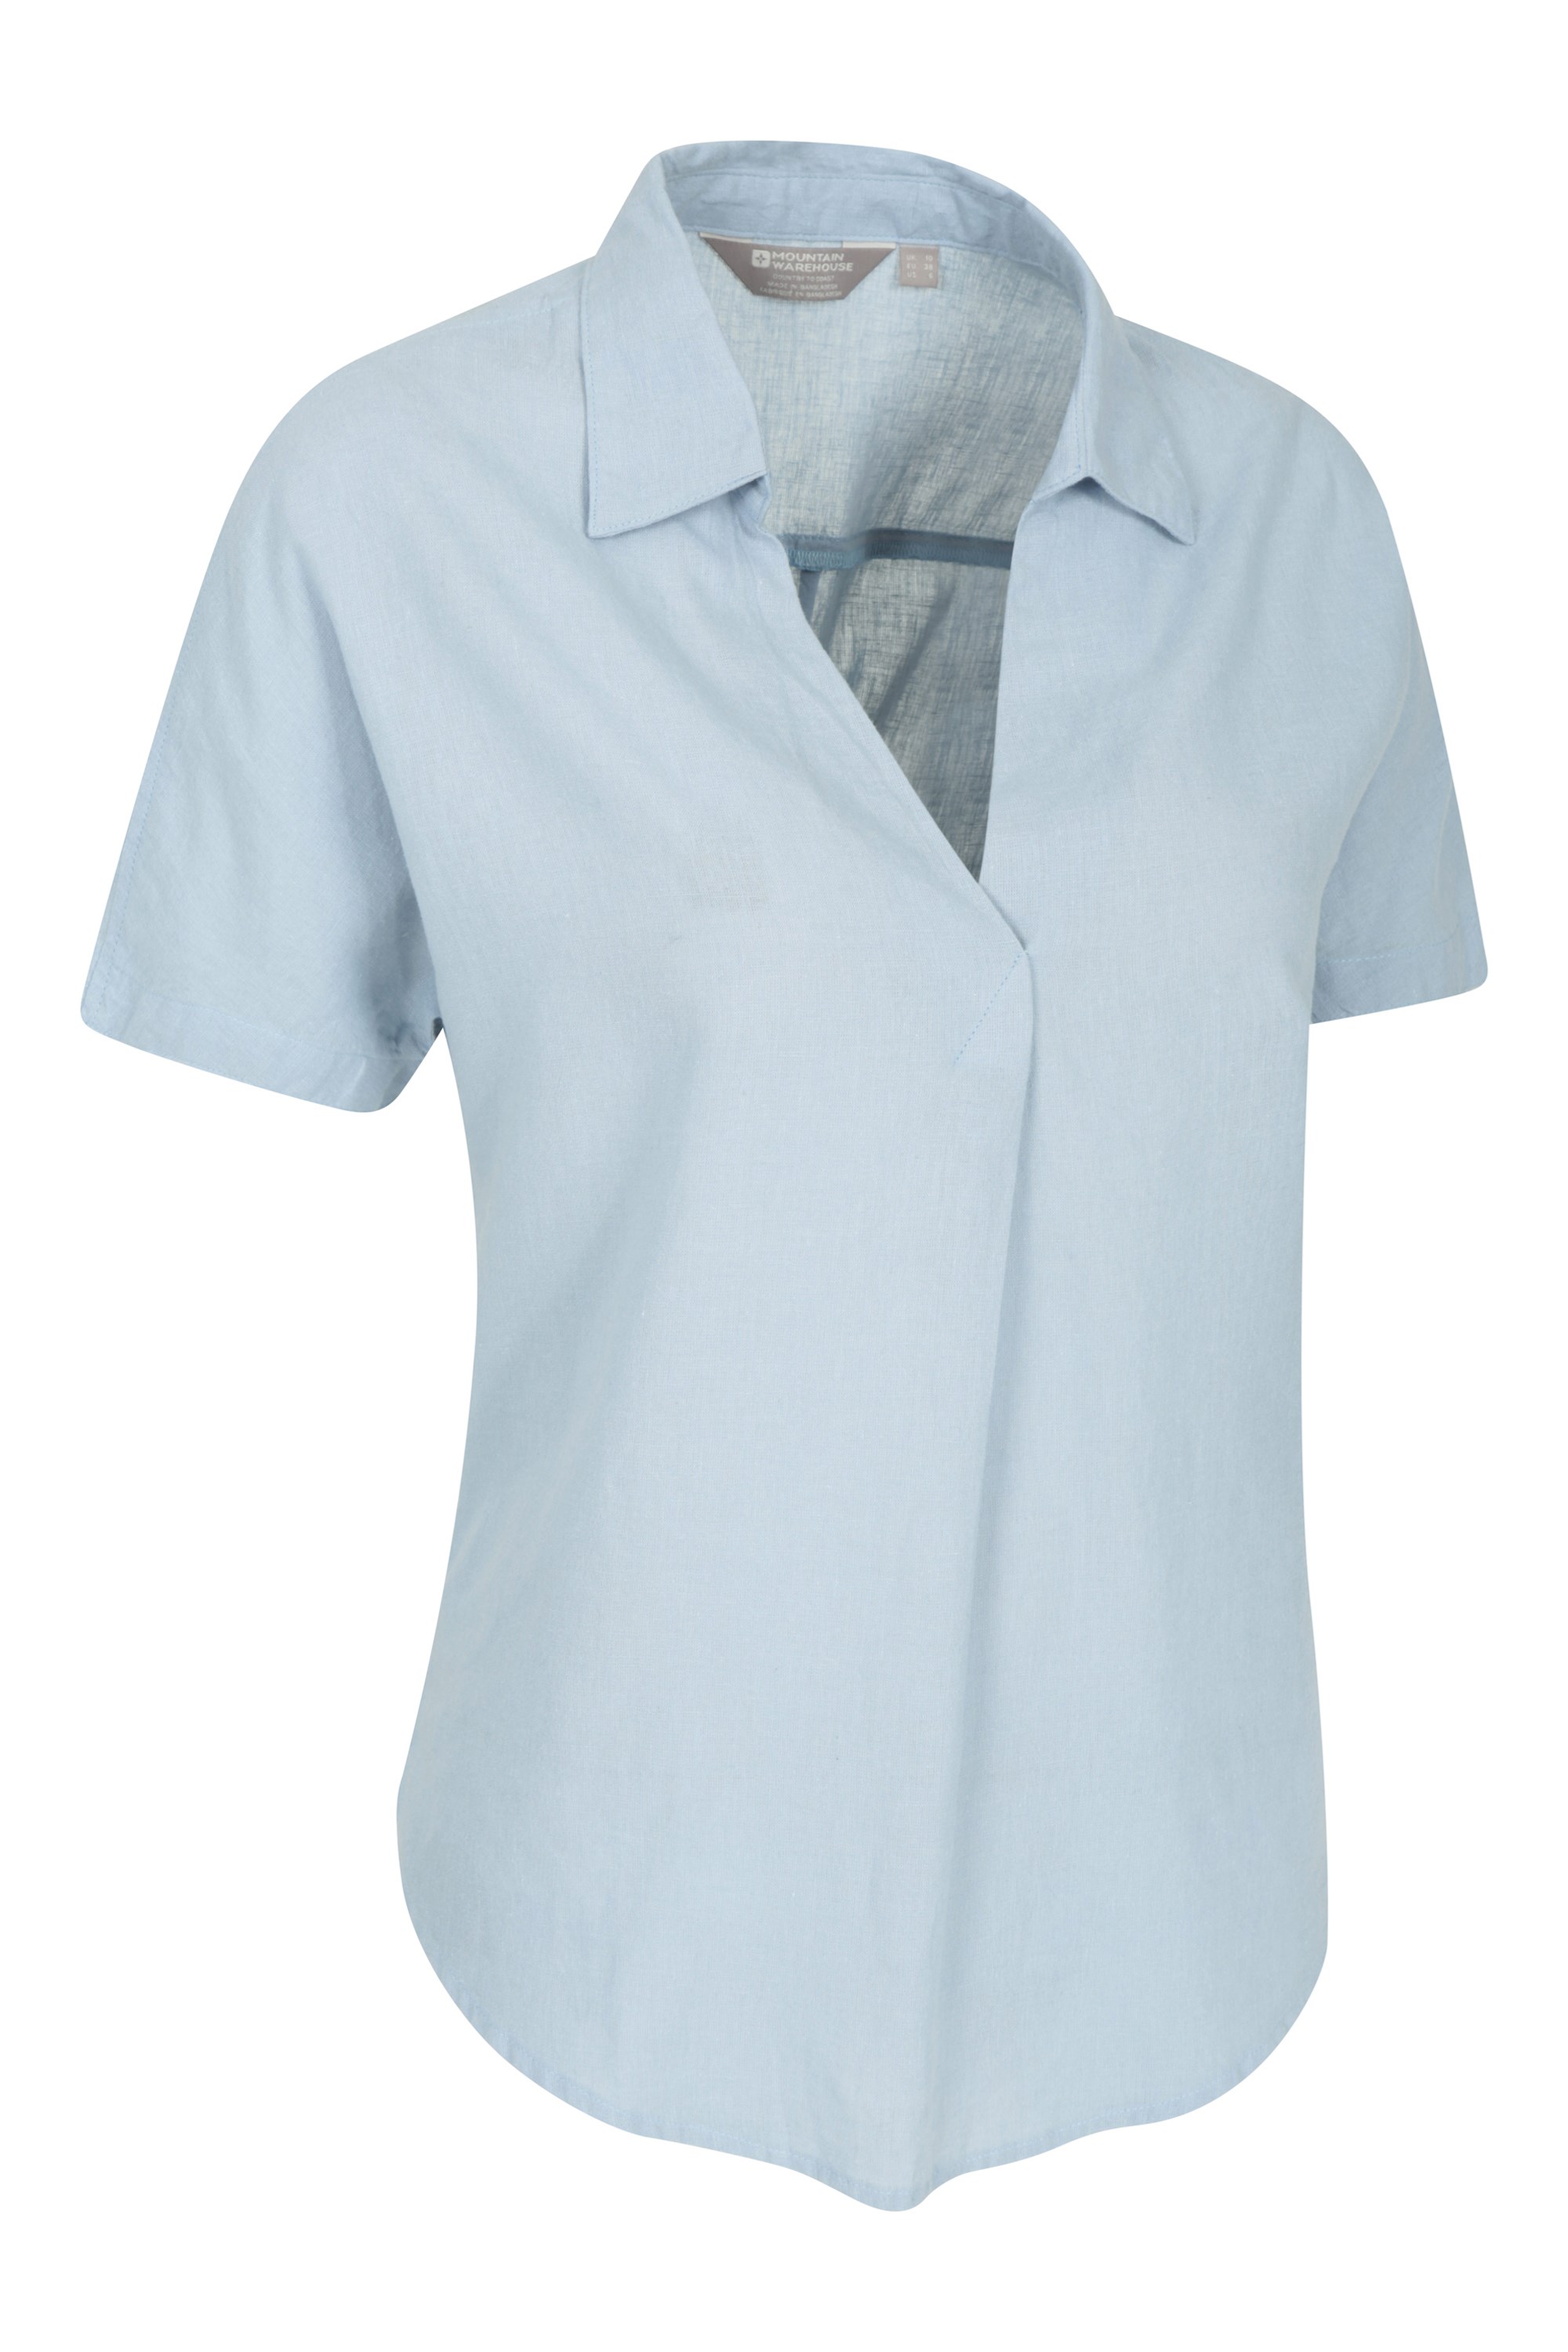 Mountain Warehouse Mountain Warehouse Breeze Womens Linen Shirt Ladies Breathable Relaxed Fit Top 